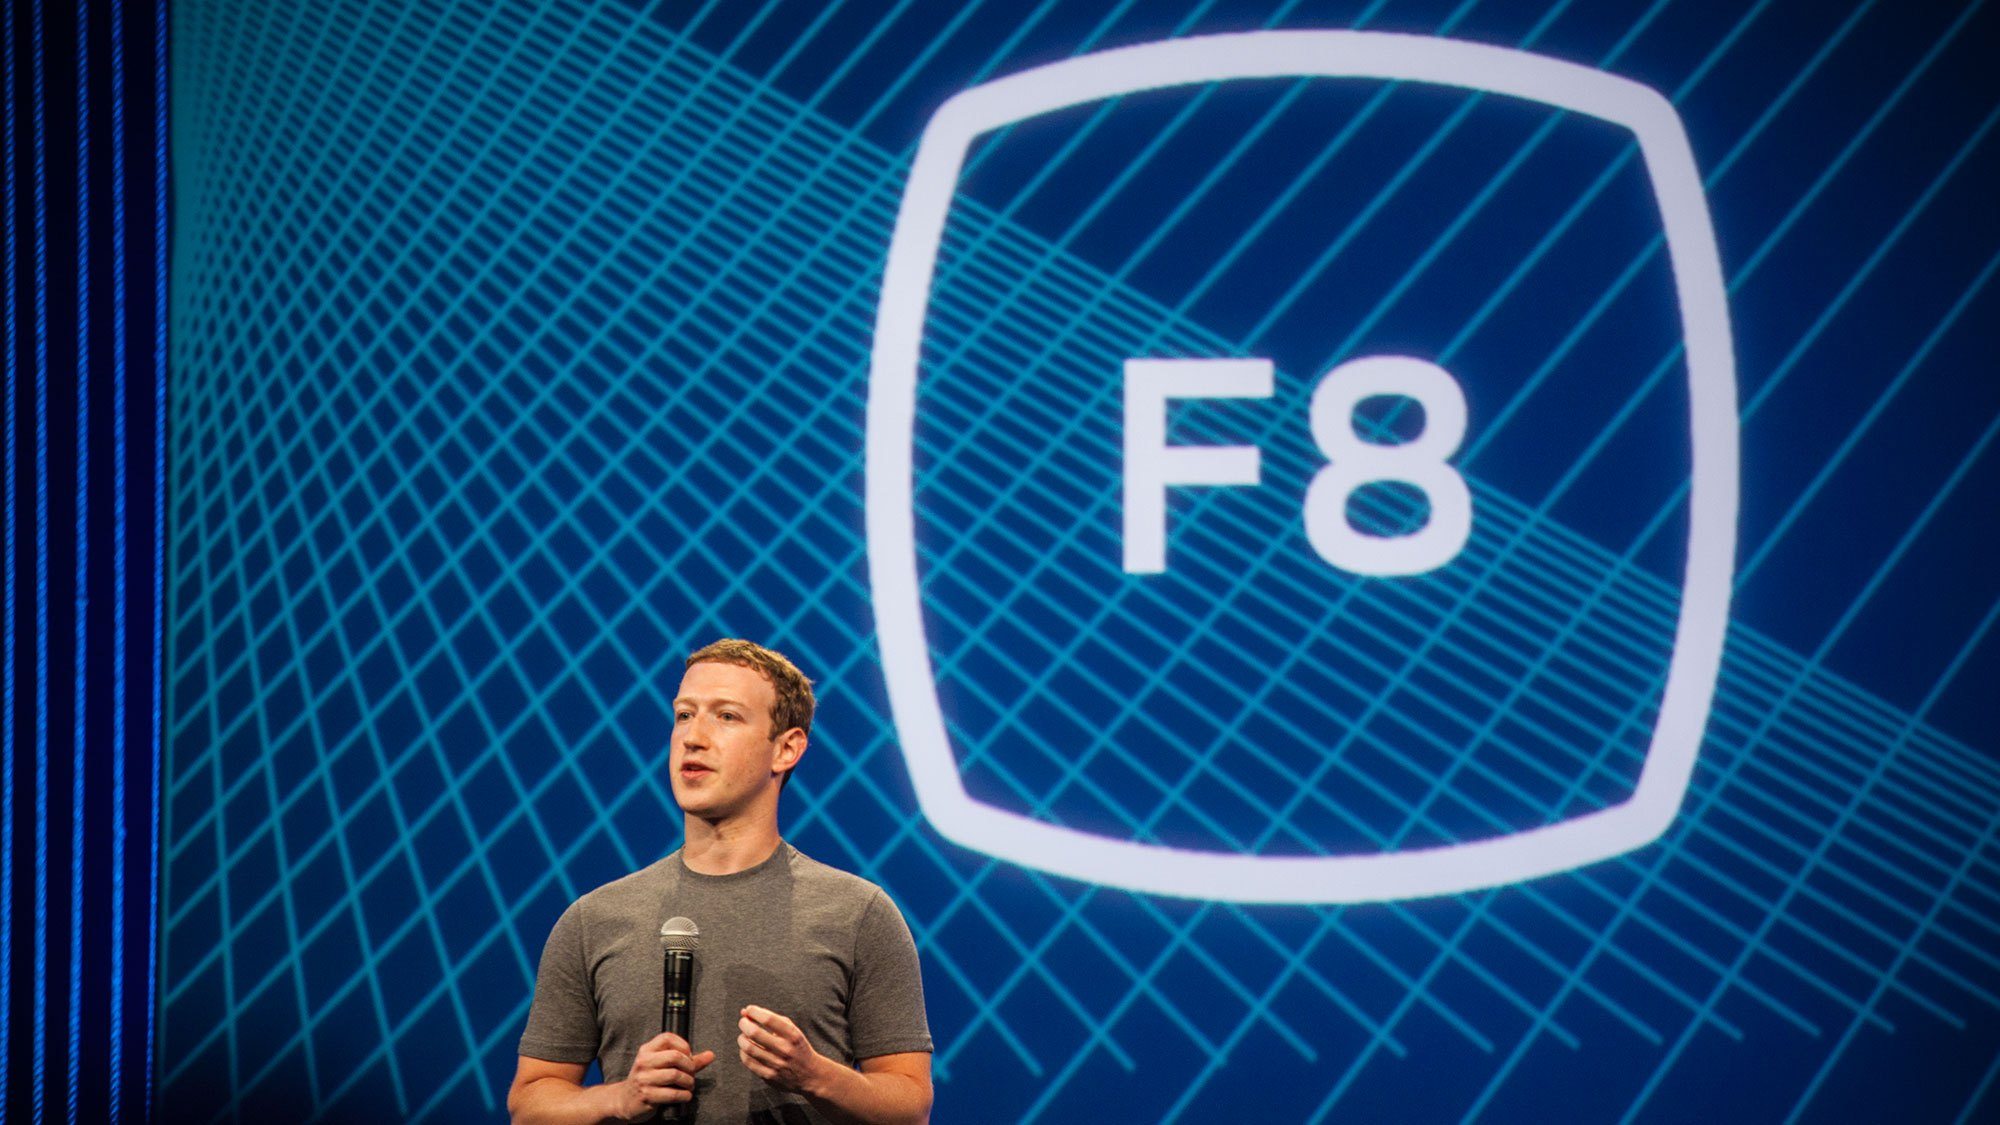 3 Reasons Facebook’s F8 Conference Matters to Higher Ed